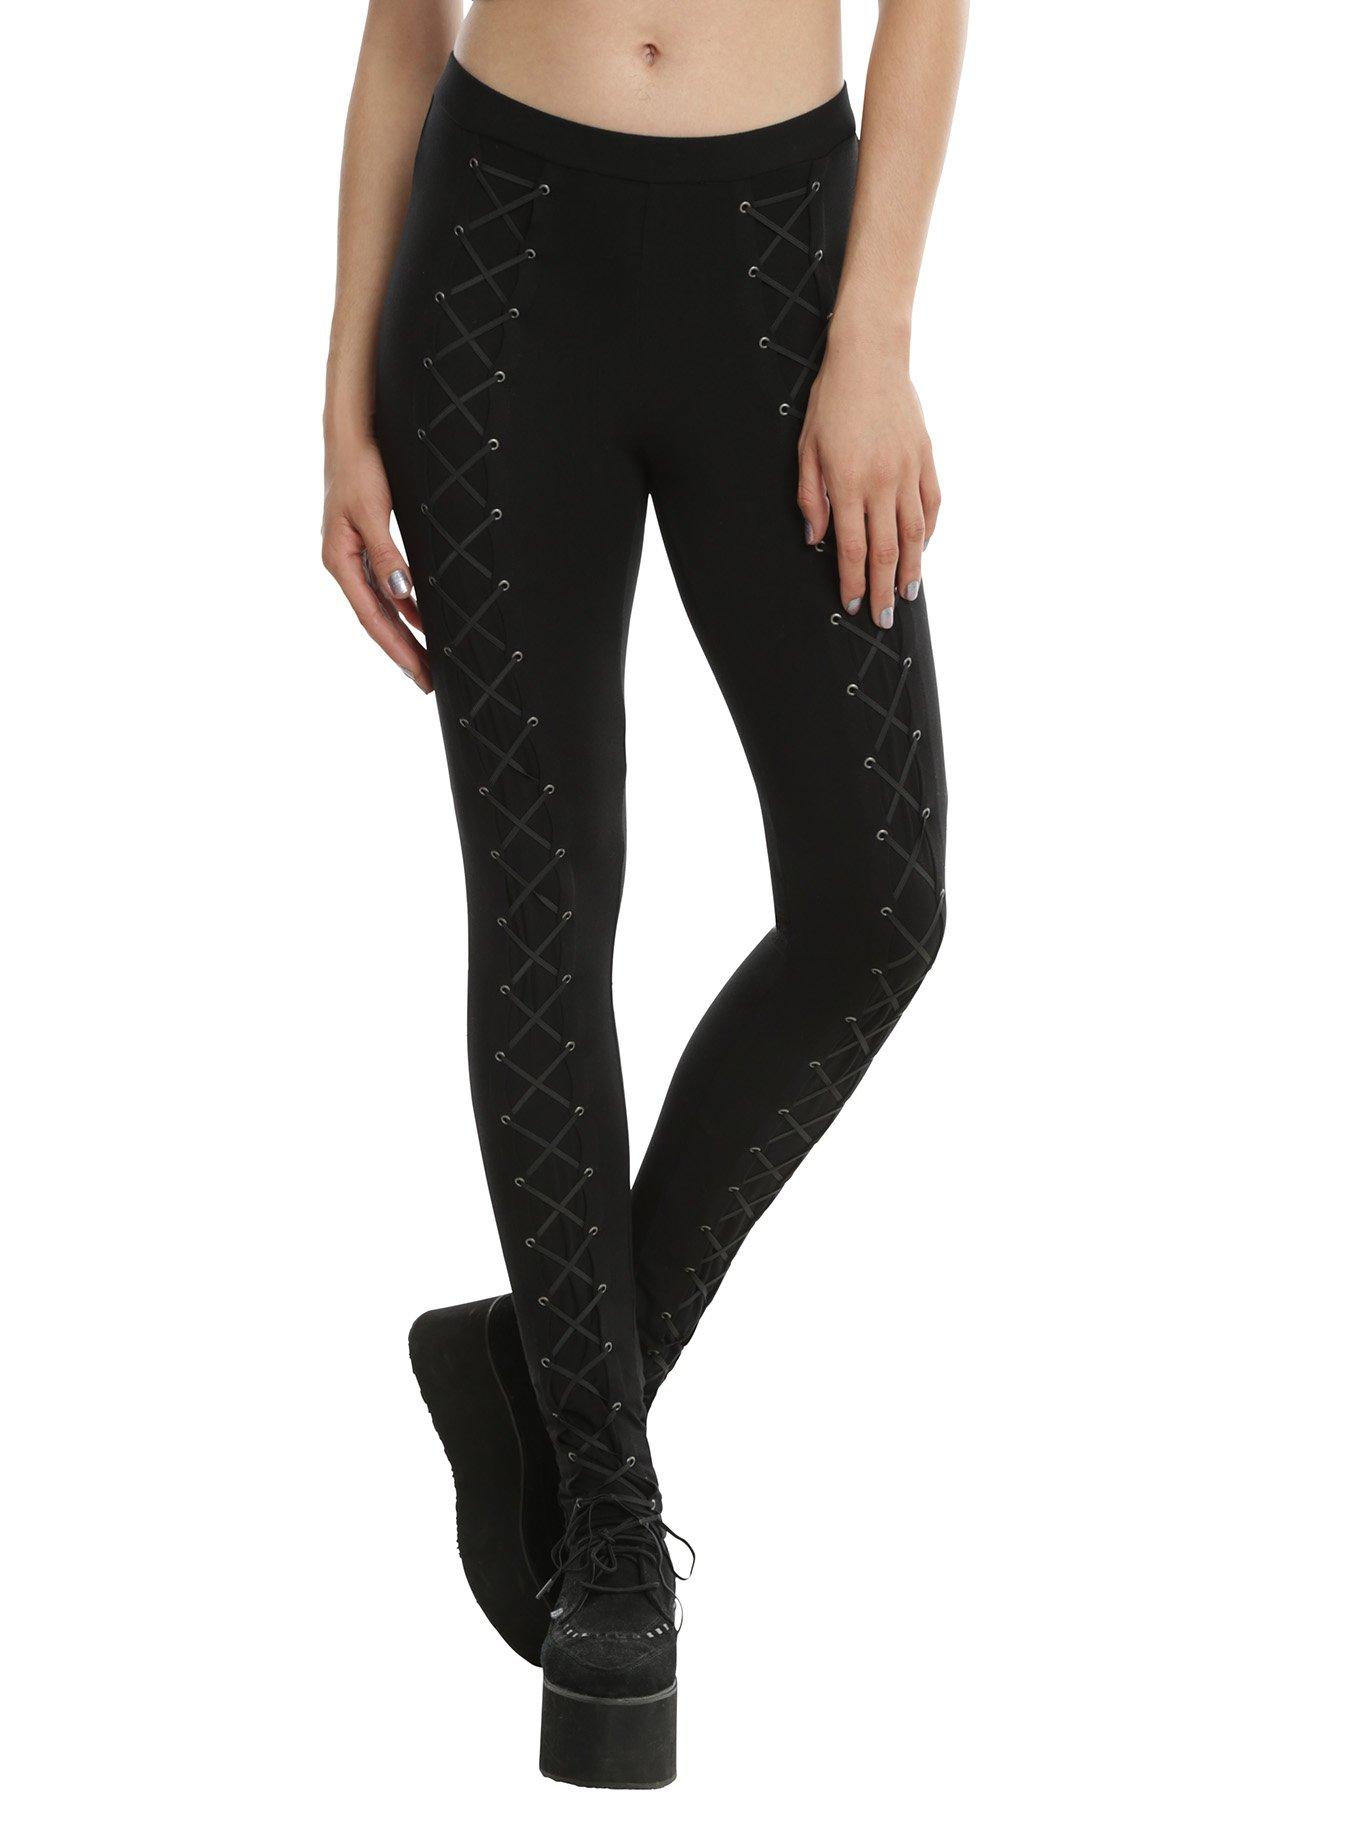 Hot Topic Lace Active Pants, Tights & Leggings